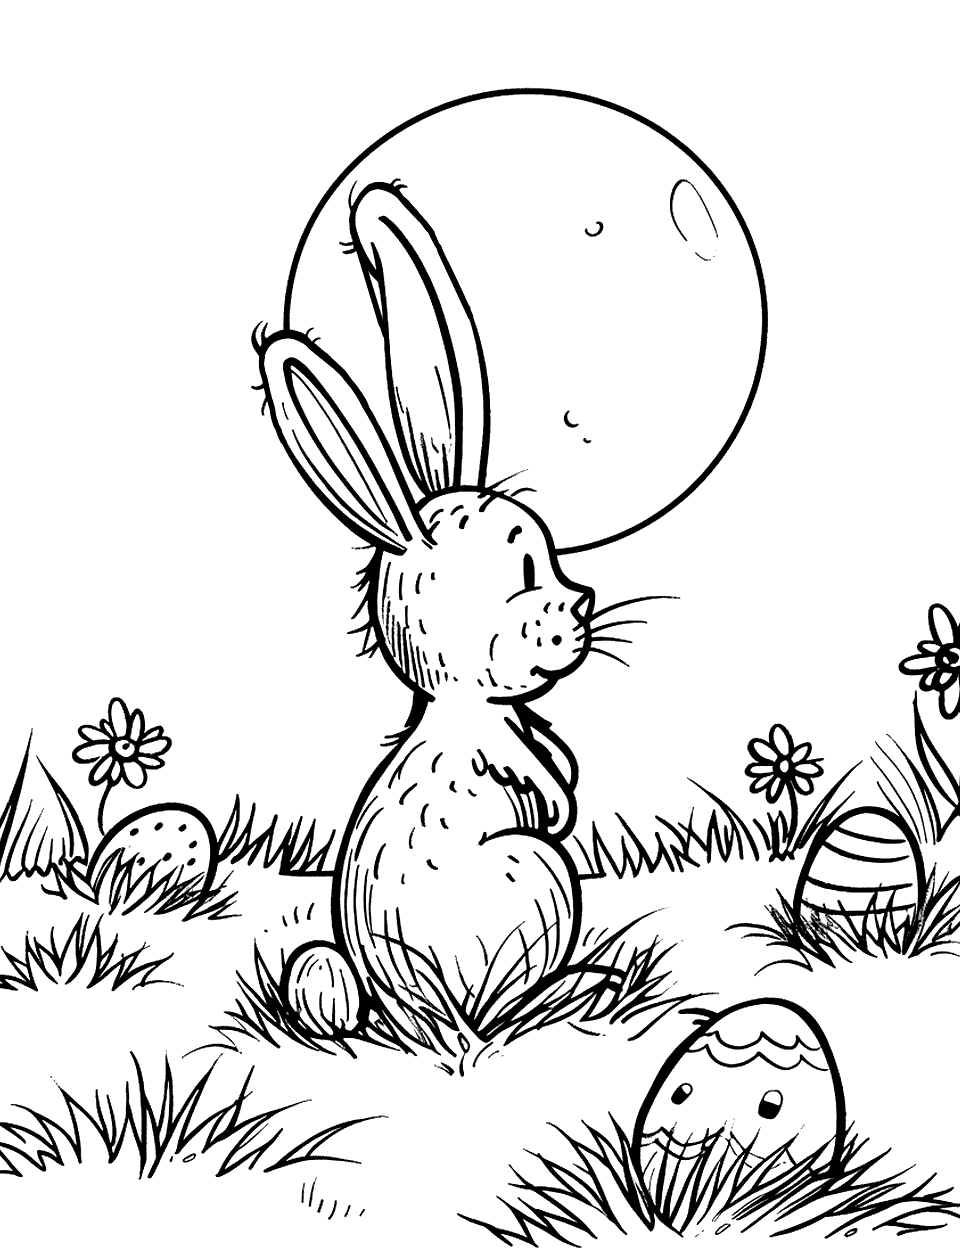 Moonlit Easter Egg Hunt Bunny Coloring Page - A scene depicting a bunny hunting for Easter eggs in the light of a full moon in a simple open field.